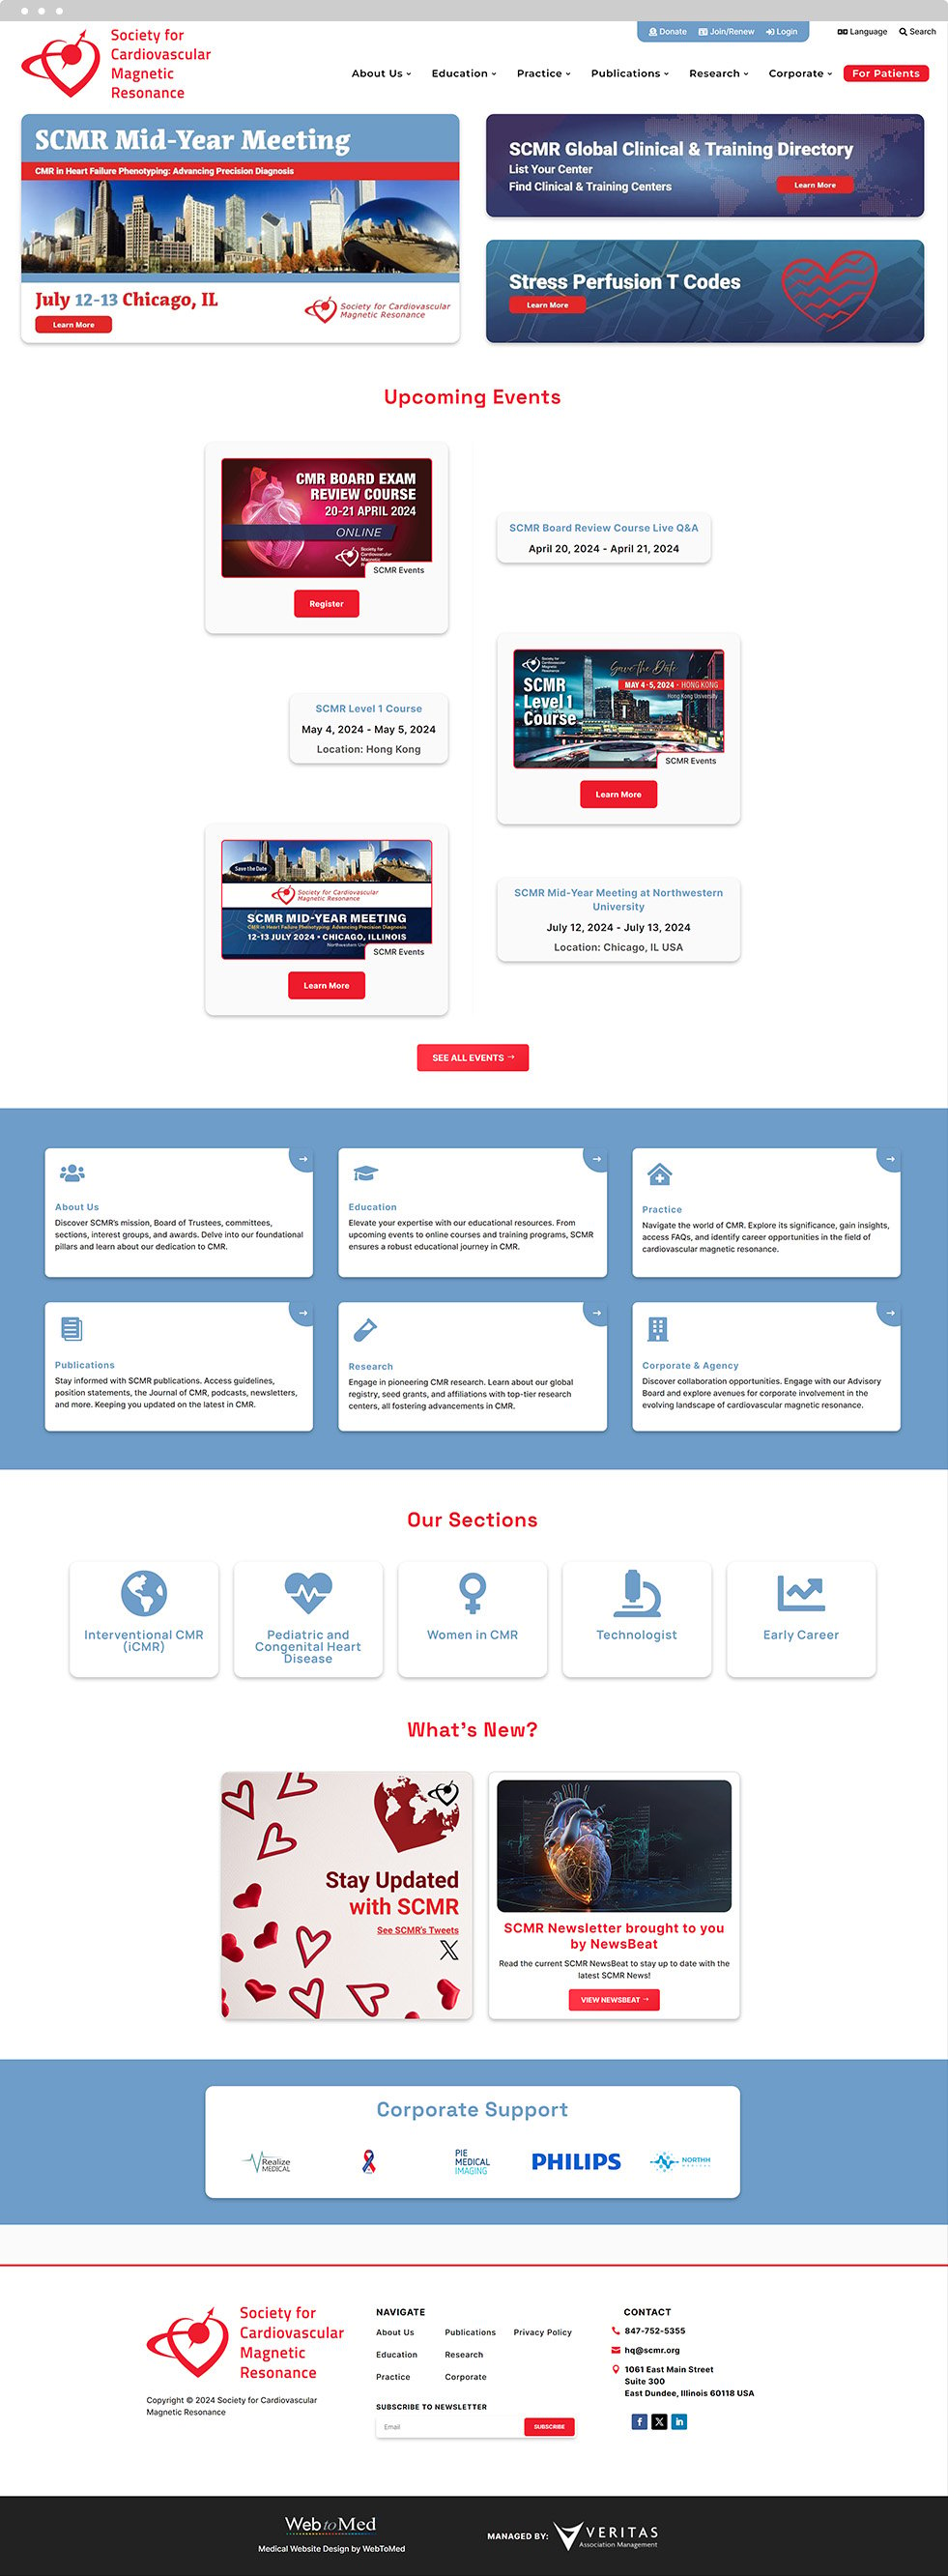 Medical Associations Website Design - Society for Cardiovascular Magnetic Resonance - Homepage